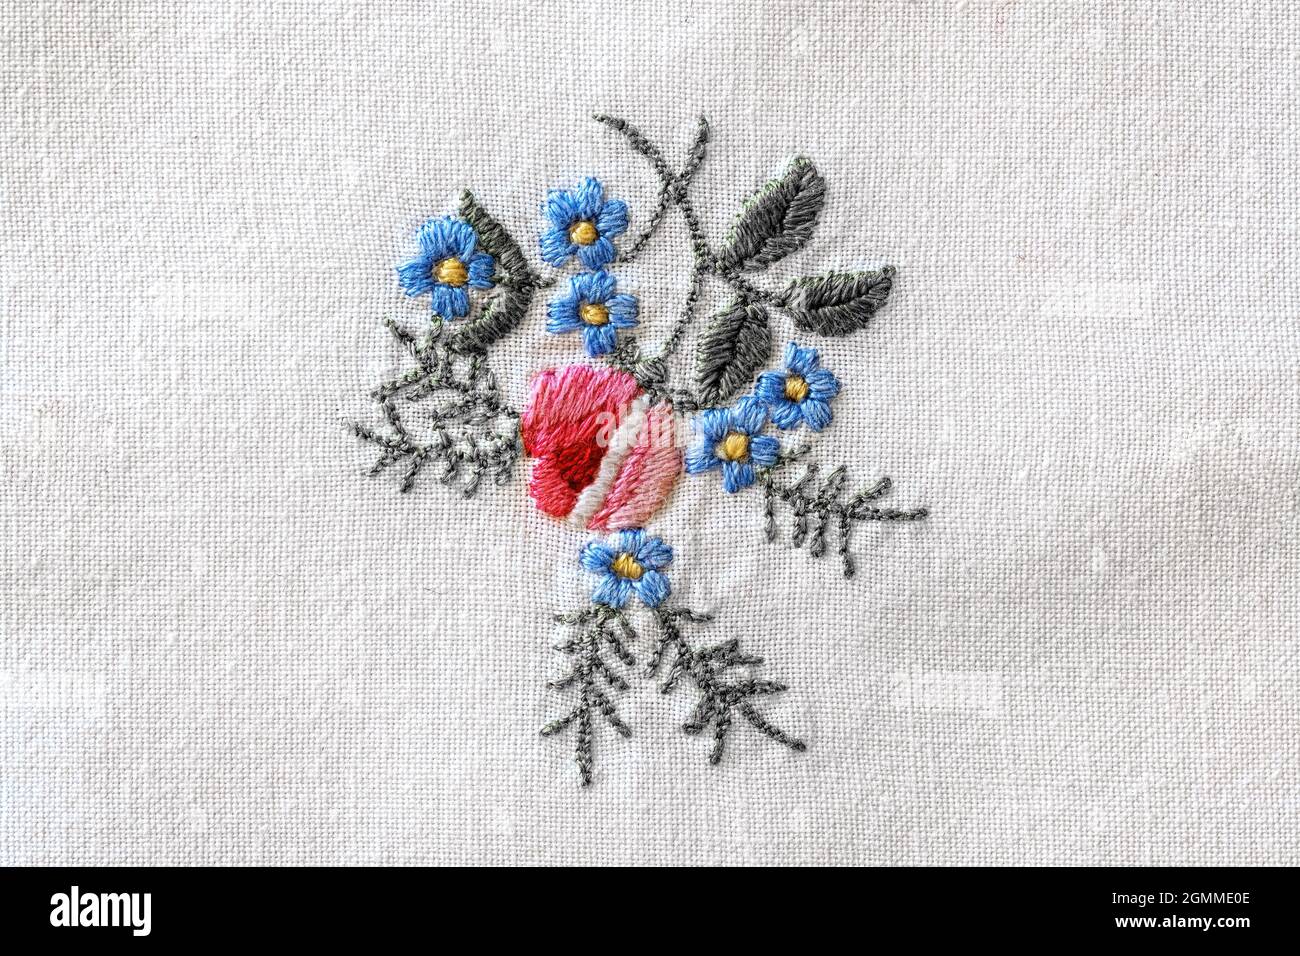 close up of a colorful flower embroidery on old white tablecloth Stock Photo